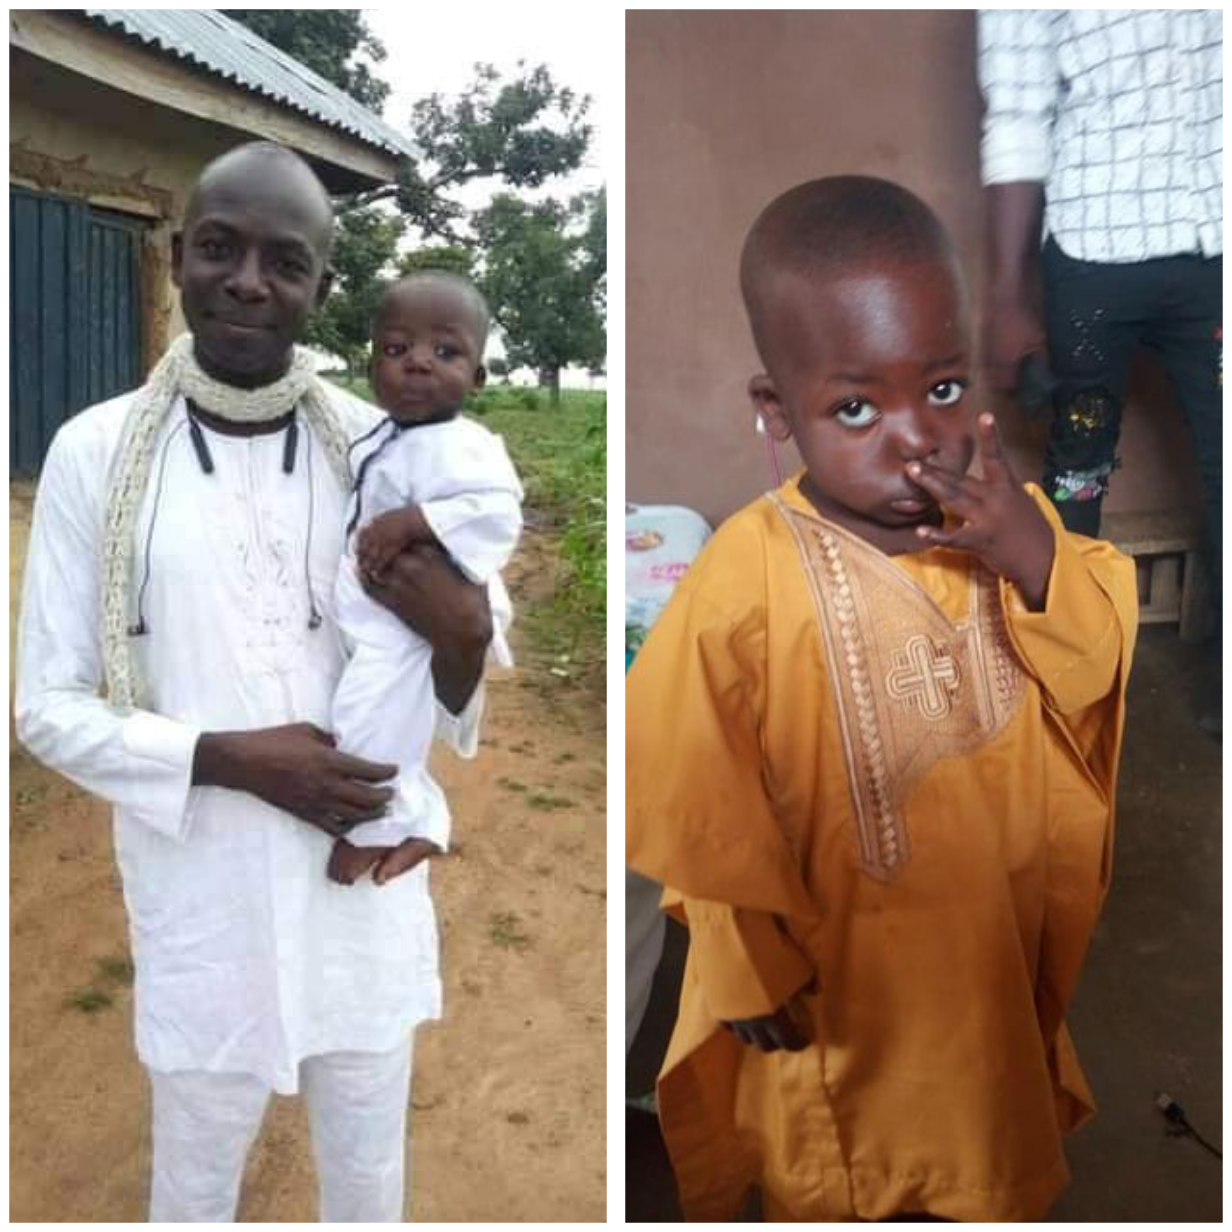 Bandits kill pastor and his 2-year-old son in Niger State